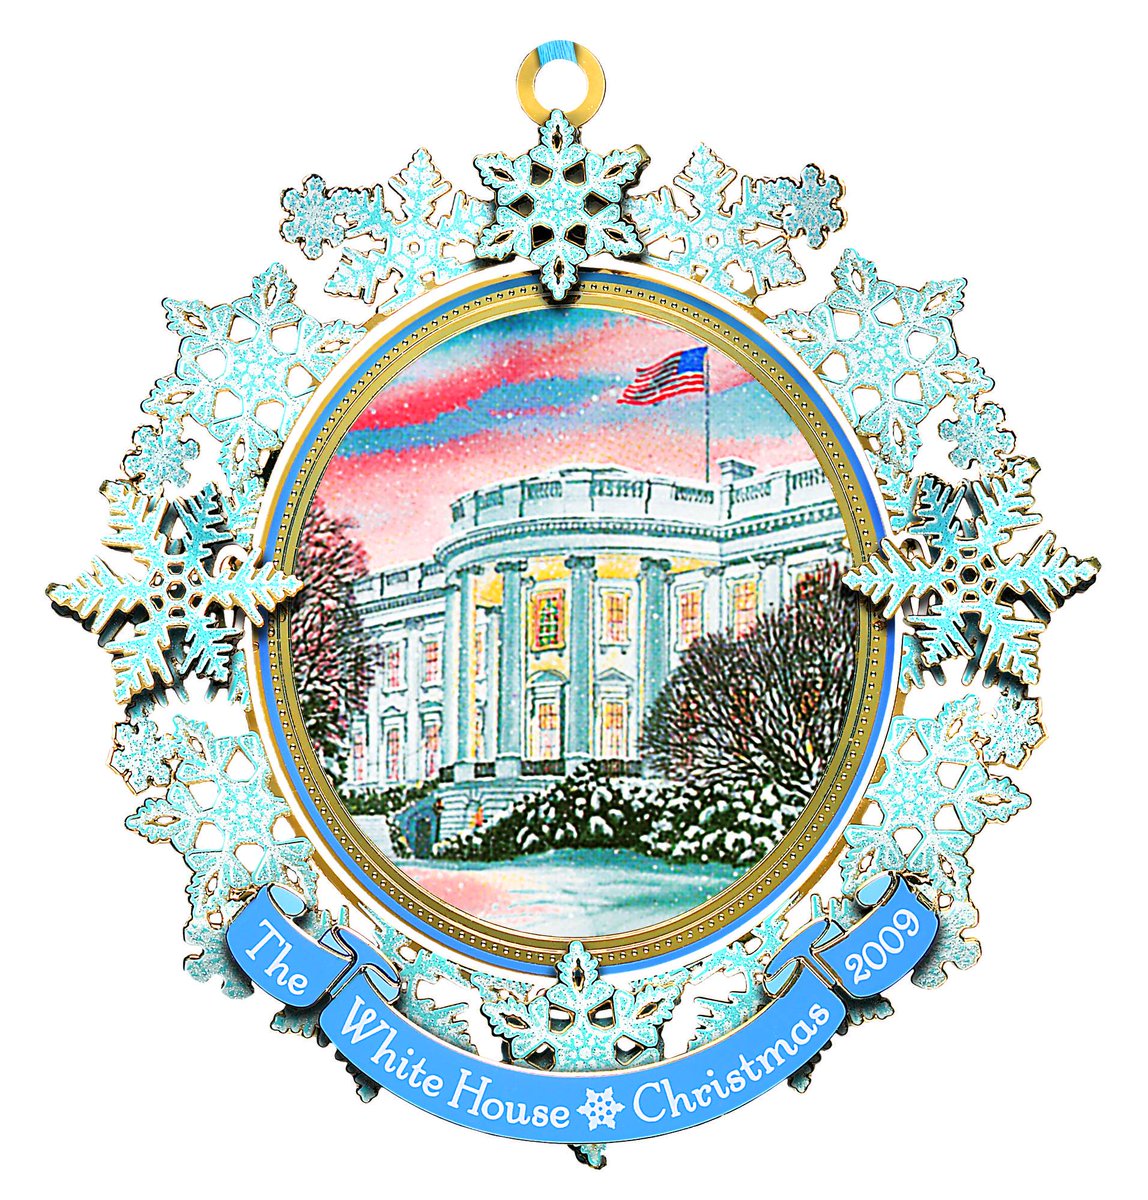 The 2009 ornament honors the only president to serve two non-consecutive terms, Grover Cleveland. This is the second Cleveland ornament, commemorating the 24th presidency from 1893-97.Buy one...or two non-consecutively:  https://shop.whitehousehistory.org/holidays/ornaments/2009-white-house-christmas-ornament-electric-lights-honoring-grover-cleveland-24th-president-of-the-united-states-1893-1897